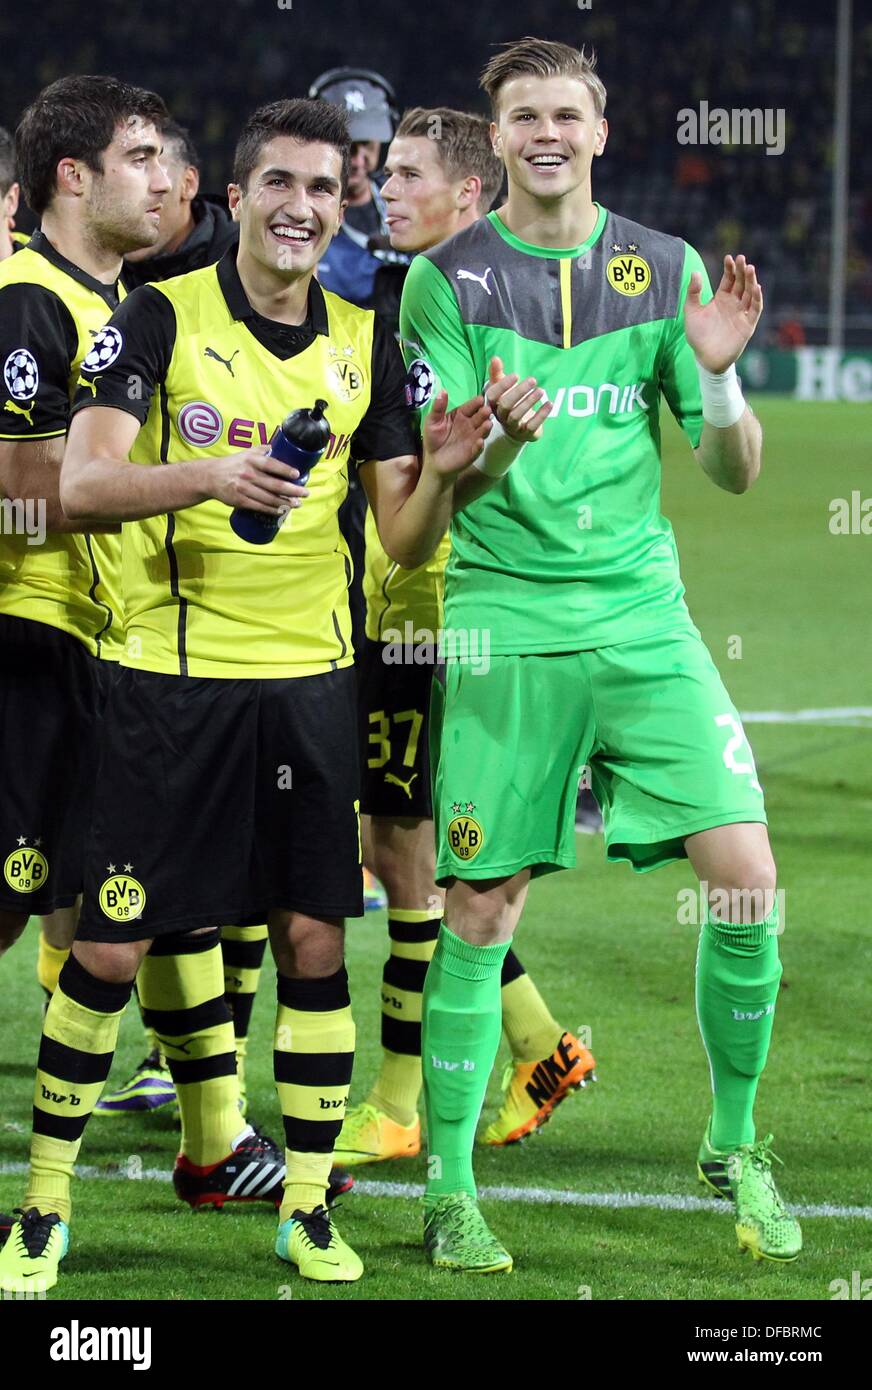 Dortmund, Germany. 01st Oct, 2013. Borussia Dortmund's Nuri Sahin (L-R) and Mitchell Langerak celebrate after their 3-0 win in the Champions League Group F match between Borussia Dortmund and Olympique Marseille in Dortmund, Germany, 01 October 2013. Photo: Friso Gentsch/dpa/Alamy Live News Stock Photo